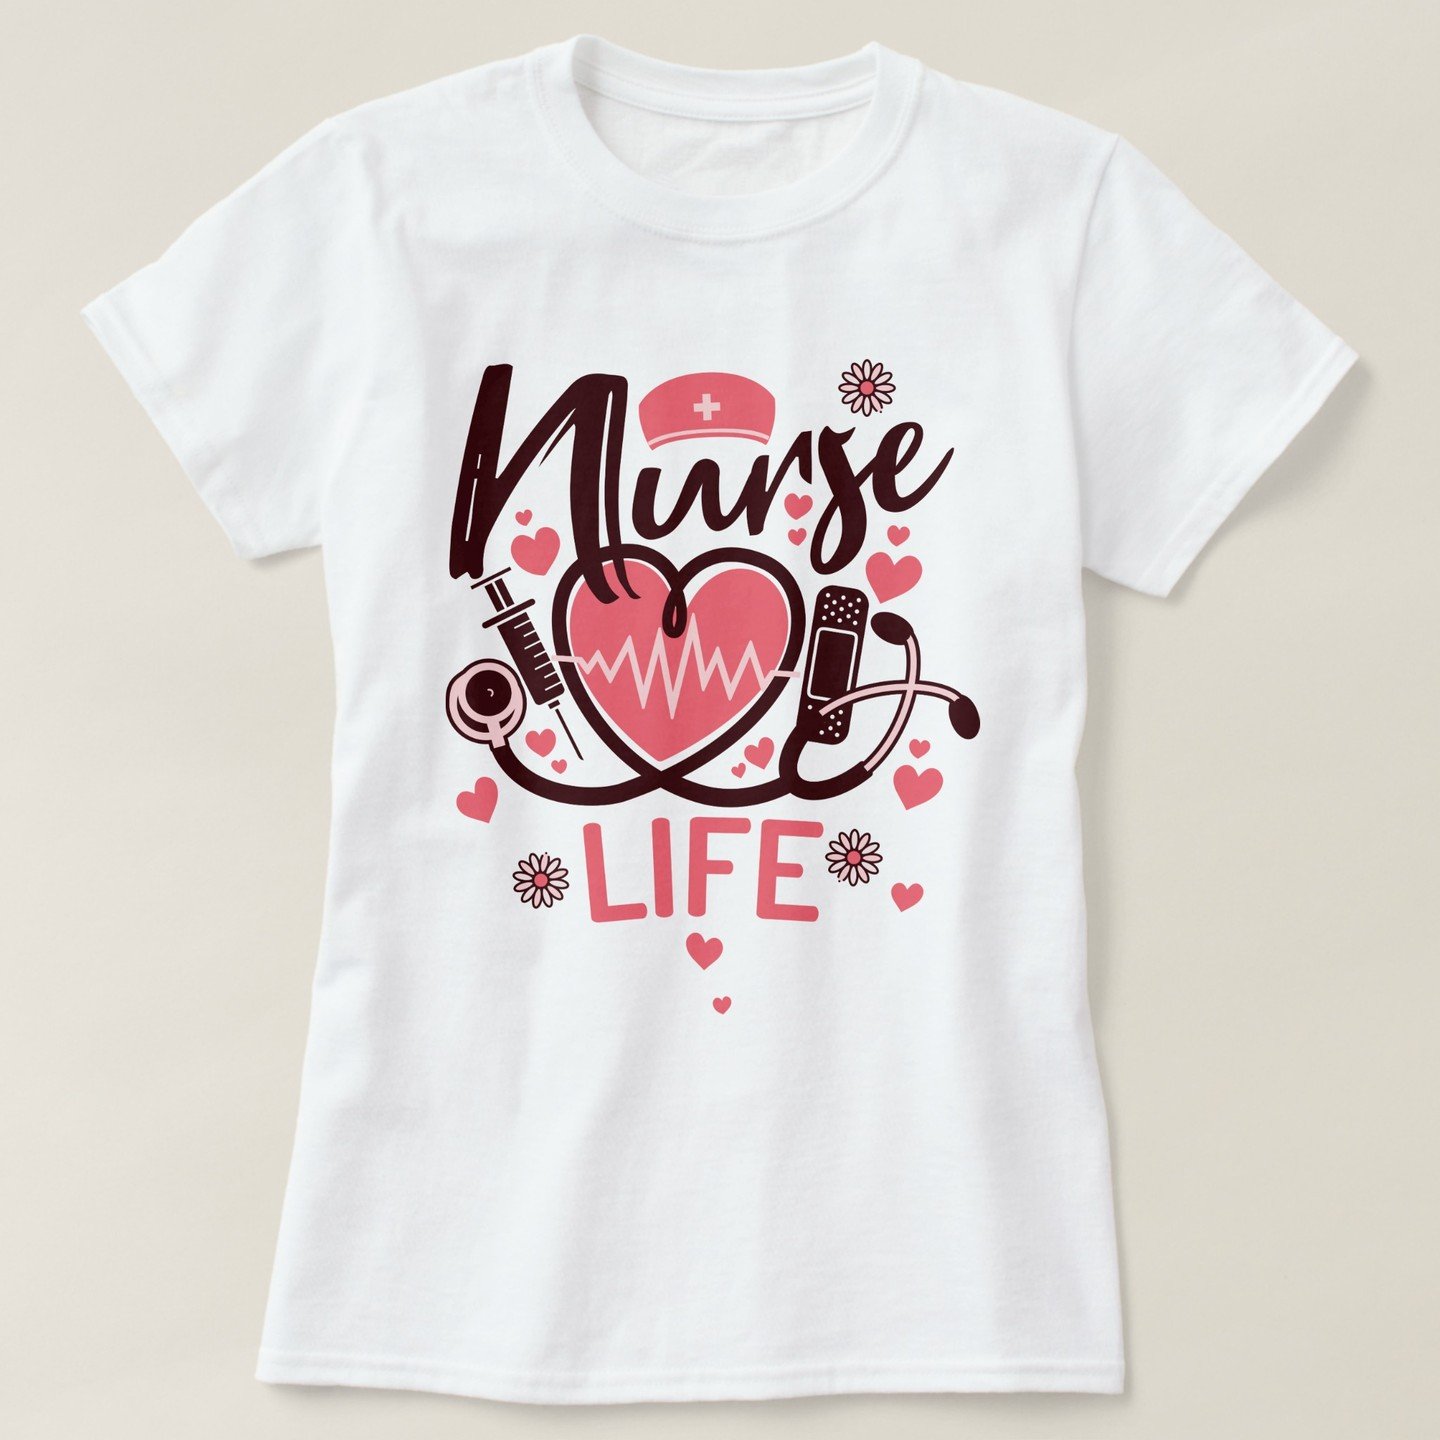 May has National Nurse Week, National Nurses Day (May 6), International Nurse Day (May 12)! Show off your Nurse self or give a gift to a nurse with this cute Nurse Life design. #linkinbio
.
#zazzle #redbubble #teepublic #zazzlemade #shirt #stickers #